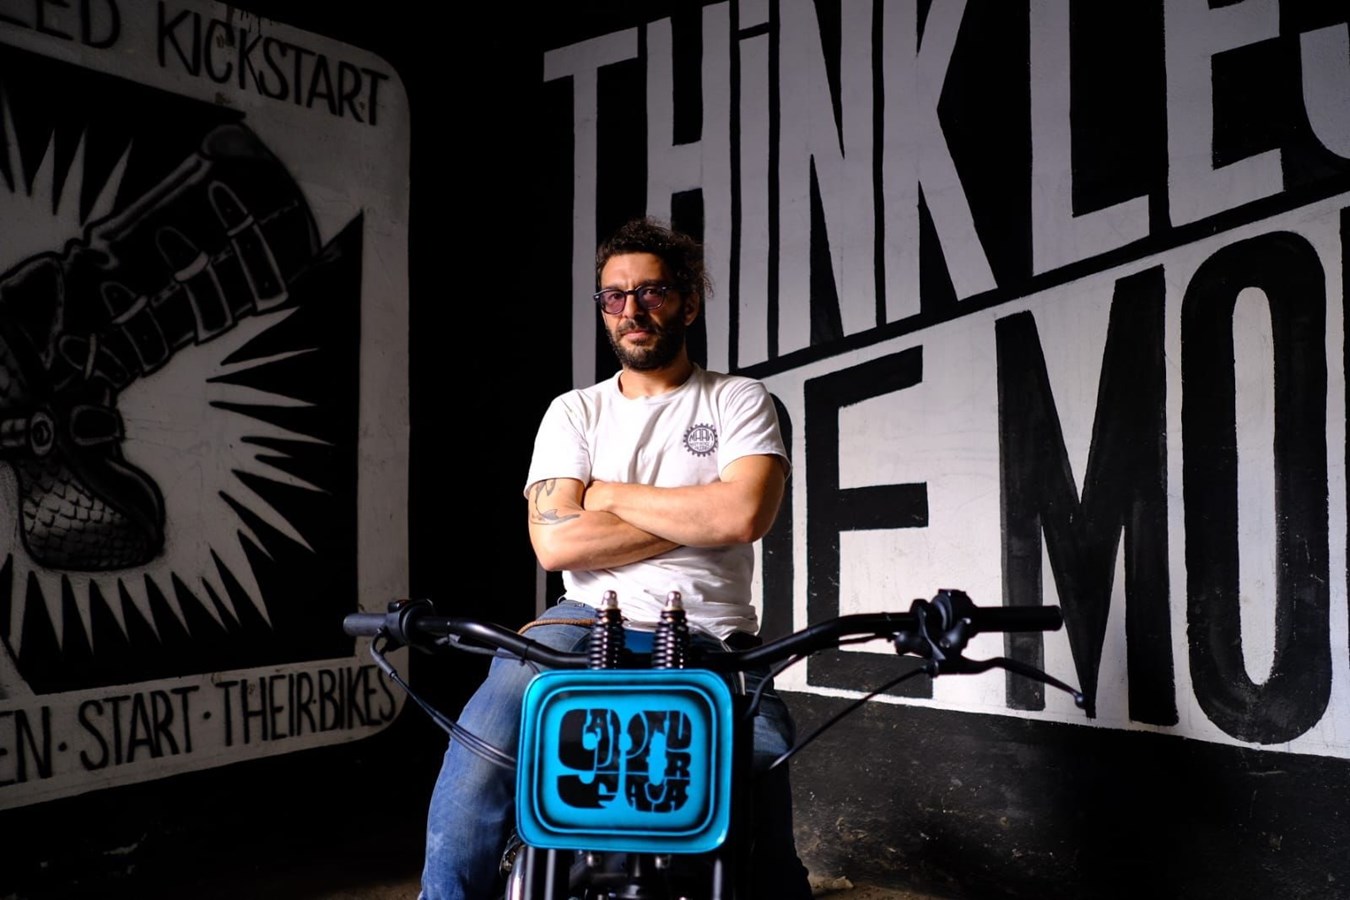 Winner of Honda Customs 2022, Nicola Manca, founder and head of  Motocicli Audaci, talks about the inspiration for the Maanboard